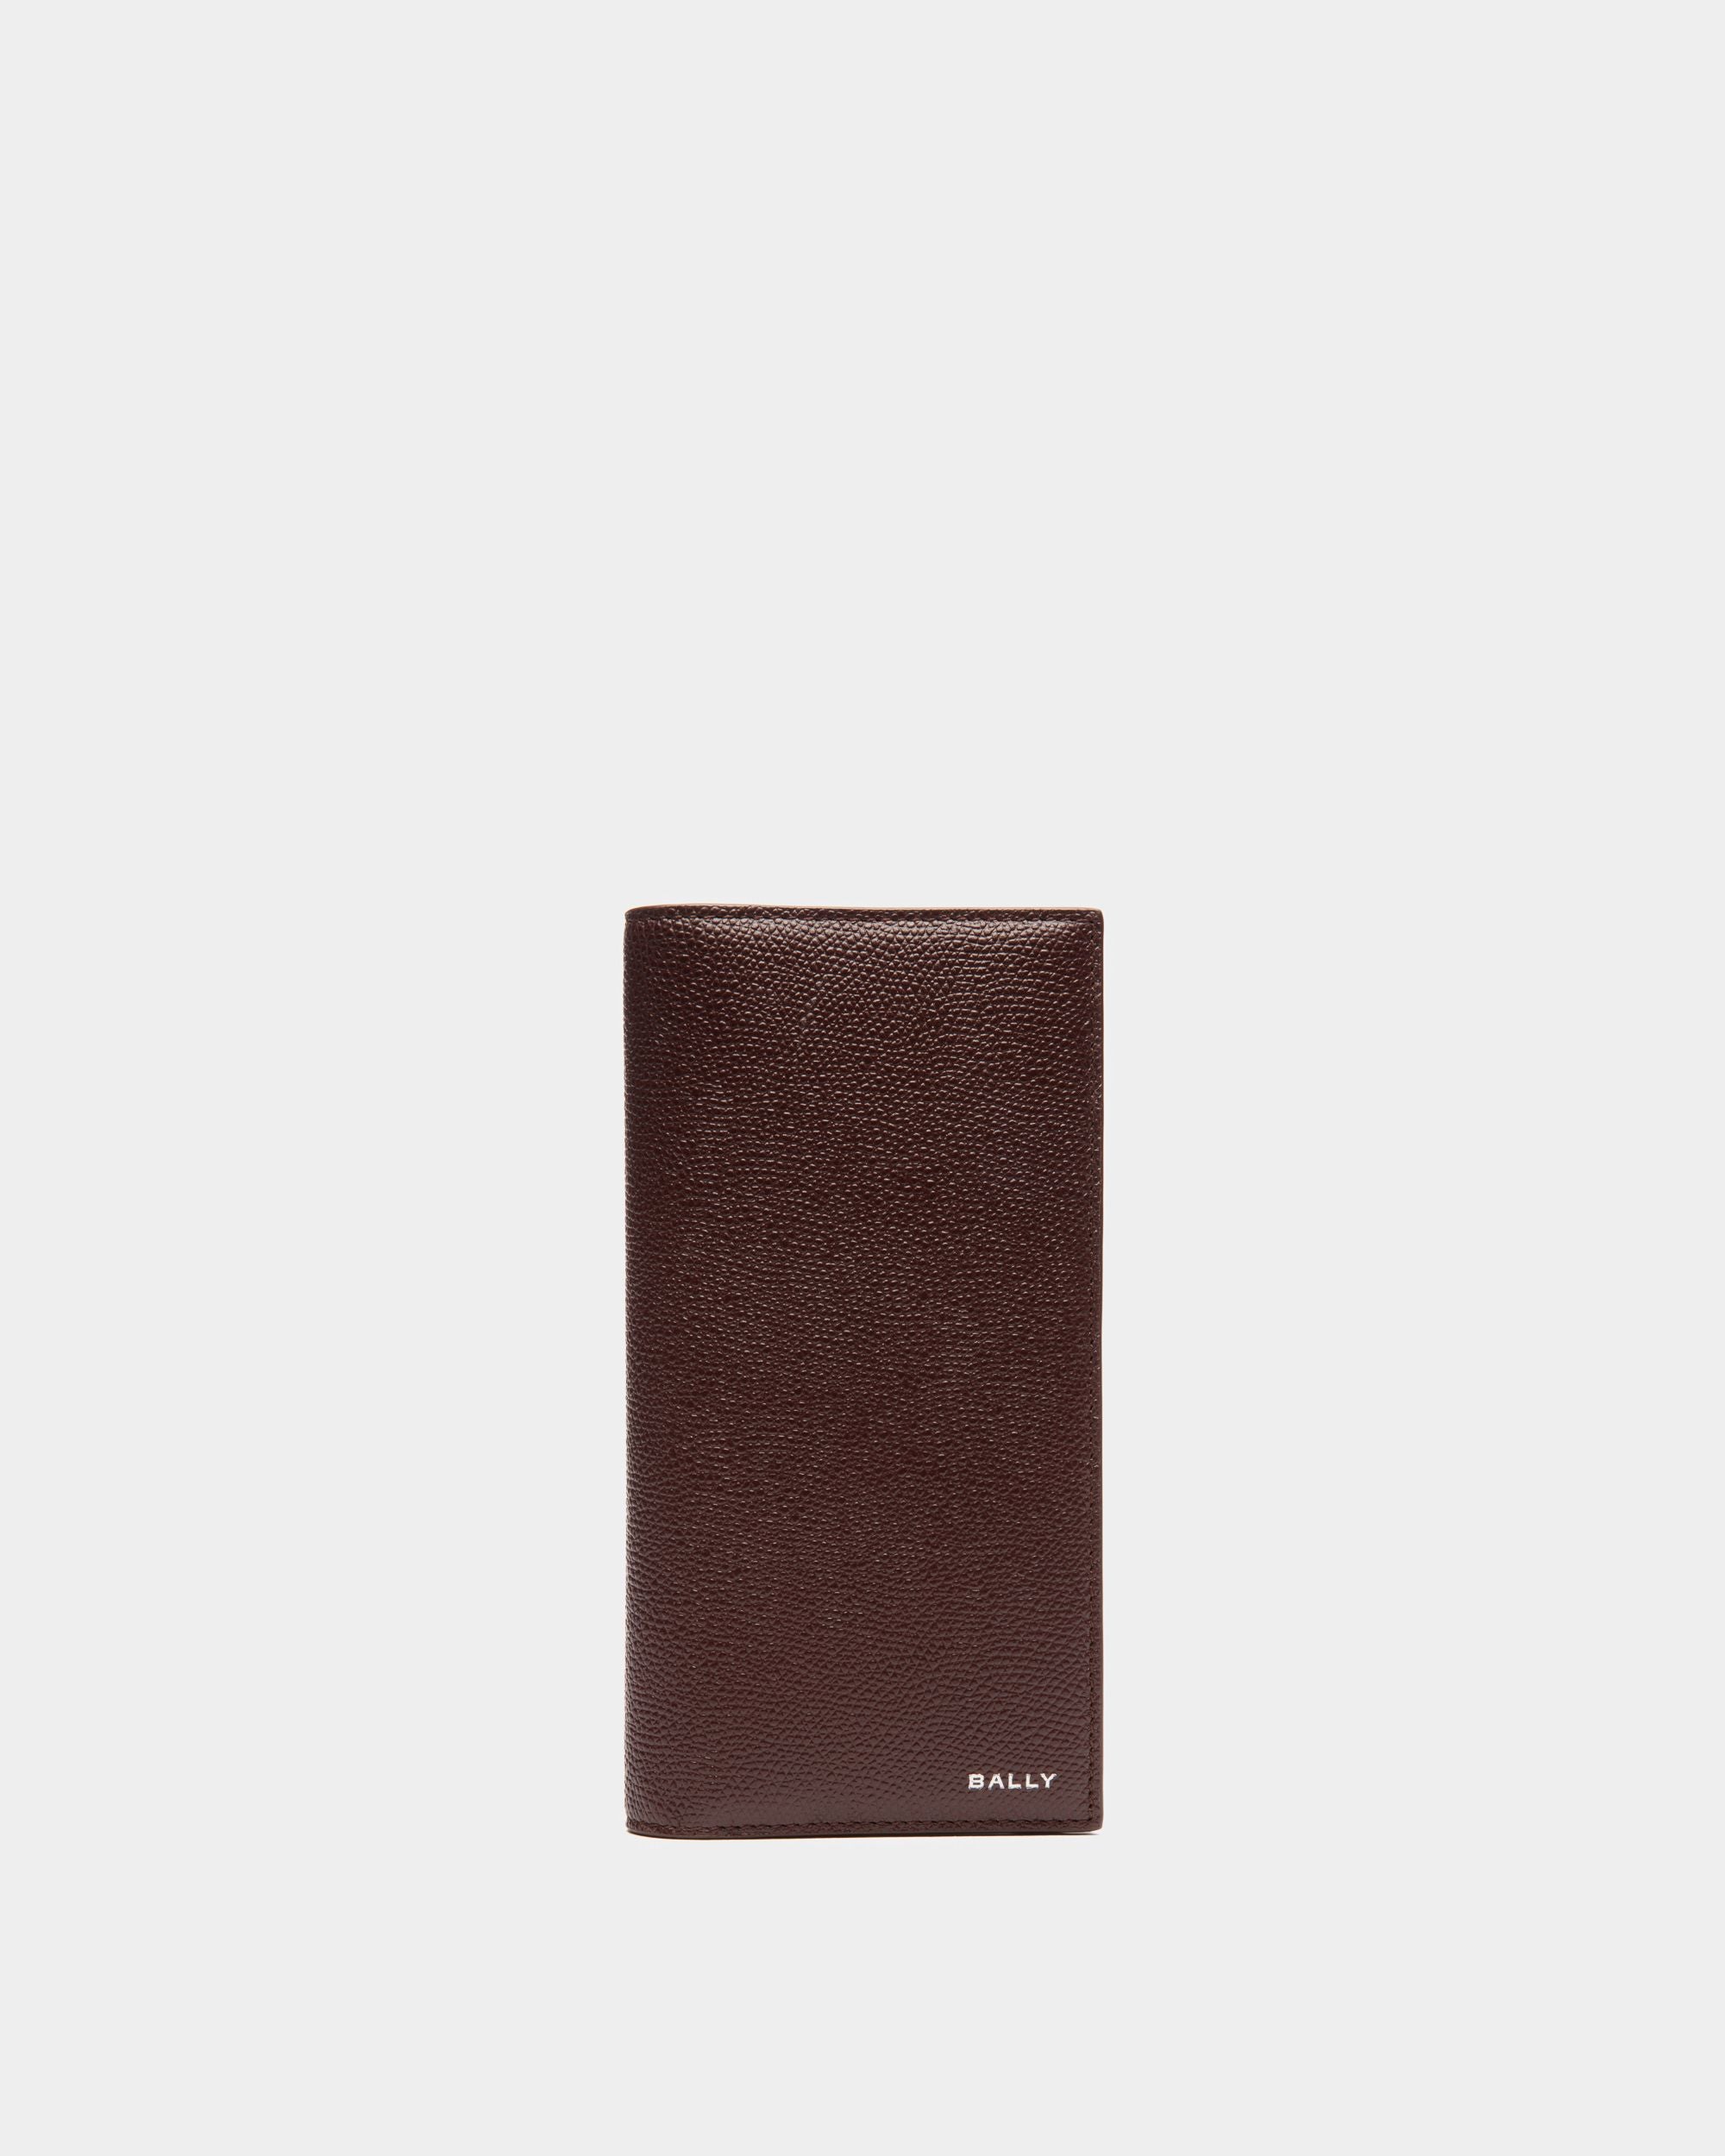 Men's Flag Continental Wallet In Chestnut Brown Grained Leather | Bally | Still Life Front